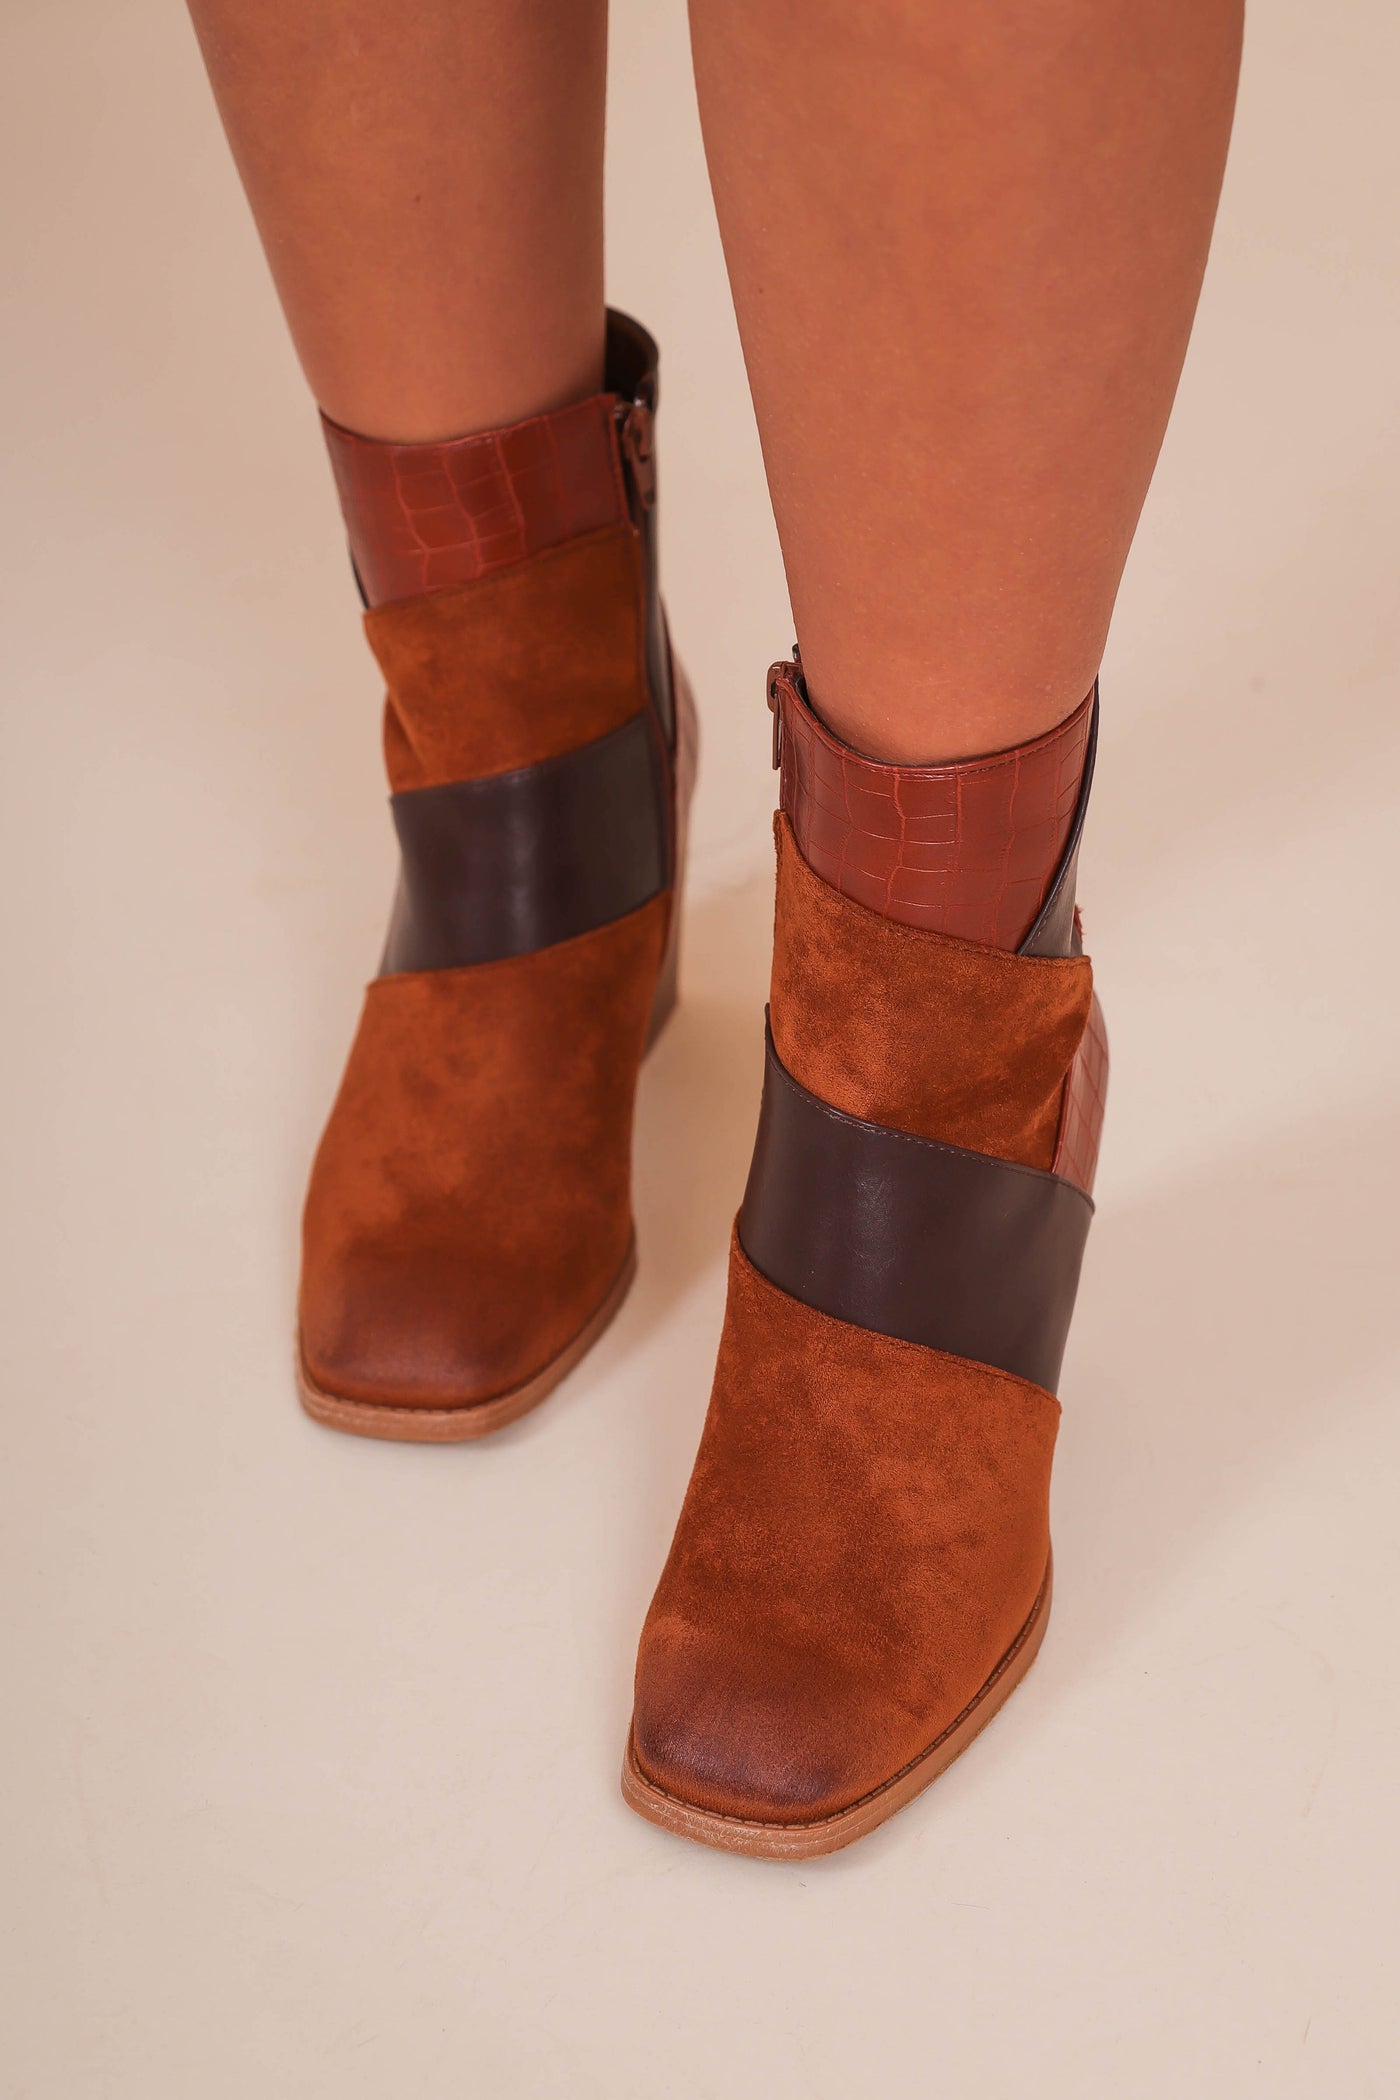 Women's Trendy Ankle Boots- Women's Fall Booties- Patchwork Boots- Pierre Dumas Booties